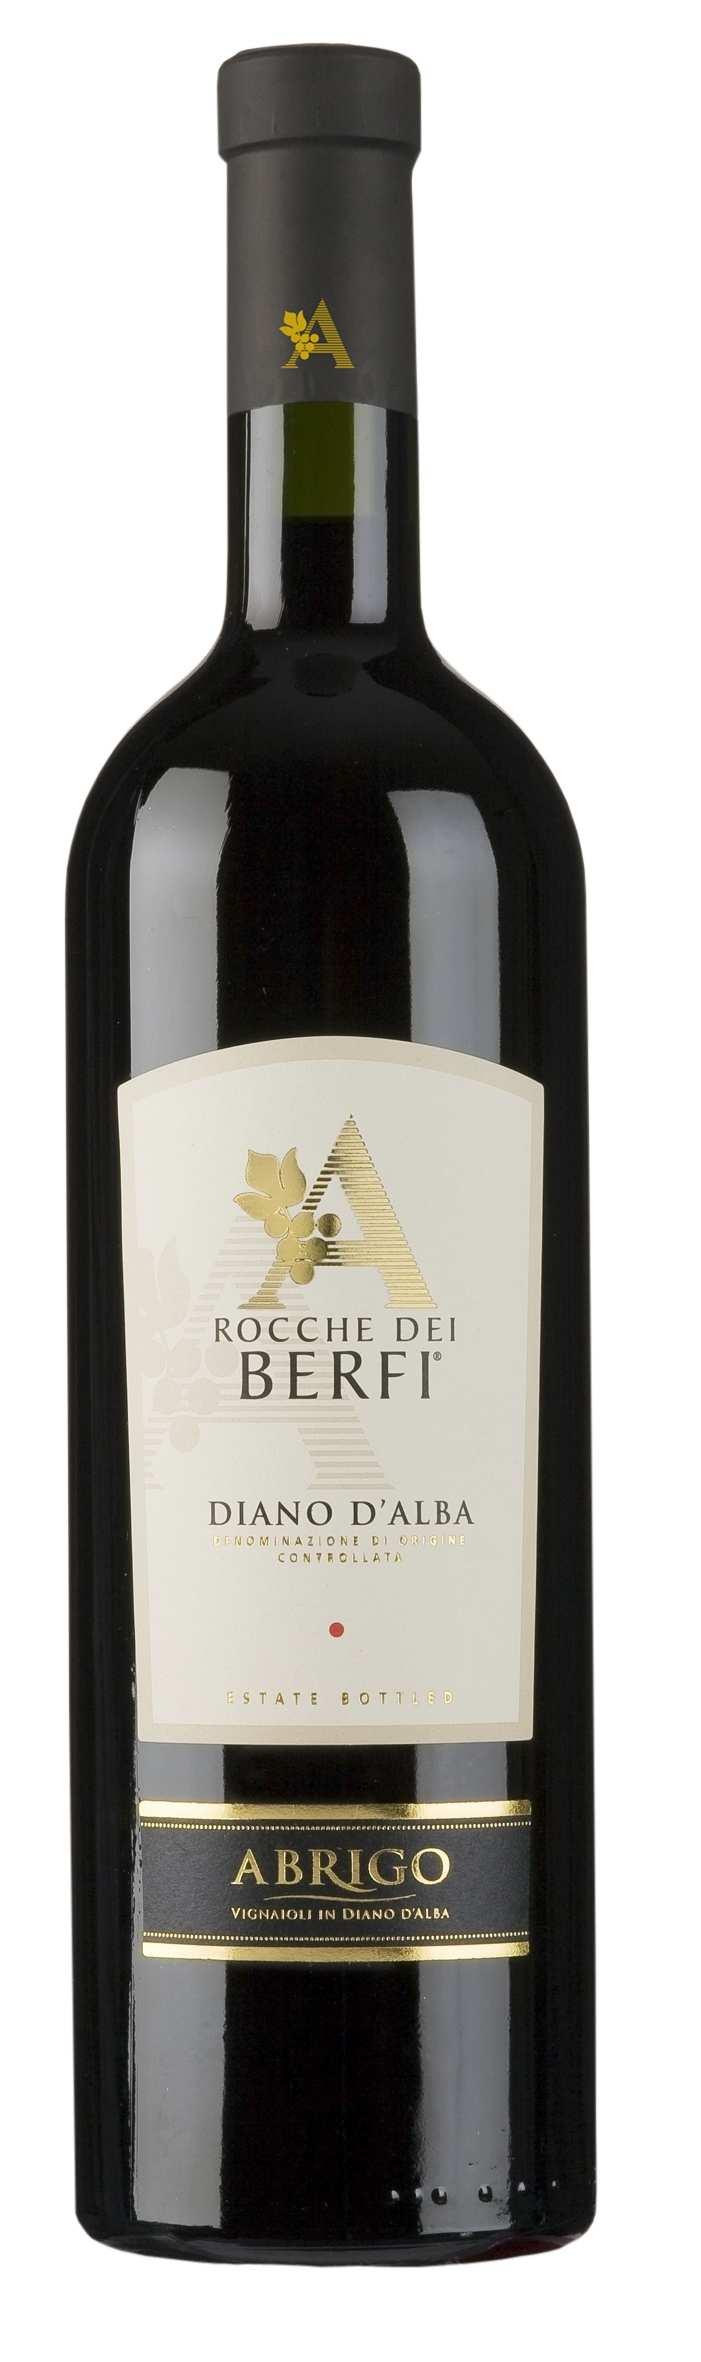 DIANO D ALBA DOC ROCCHE DEI BERFI PRODUCED WITH GRAPES FROM THE SORÌ, THE BETTER EXPOSED AND SUNNIEST AREAS.